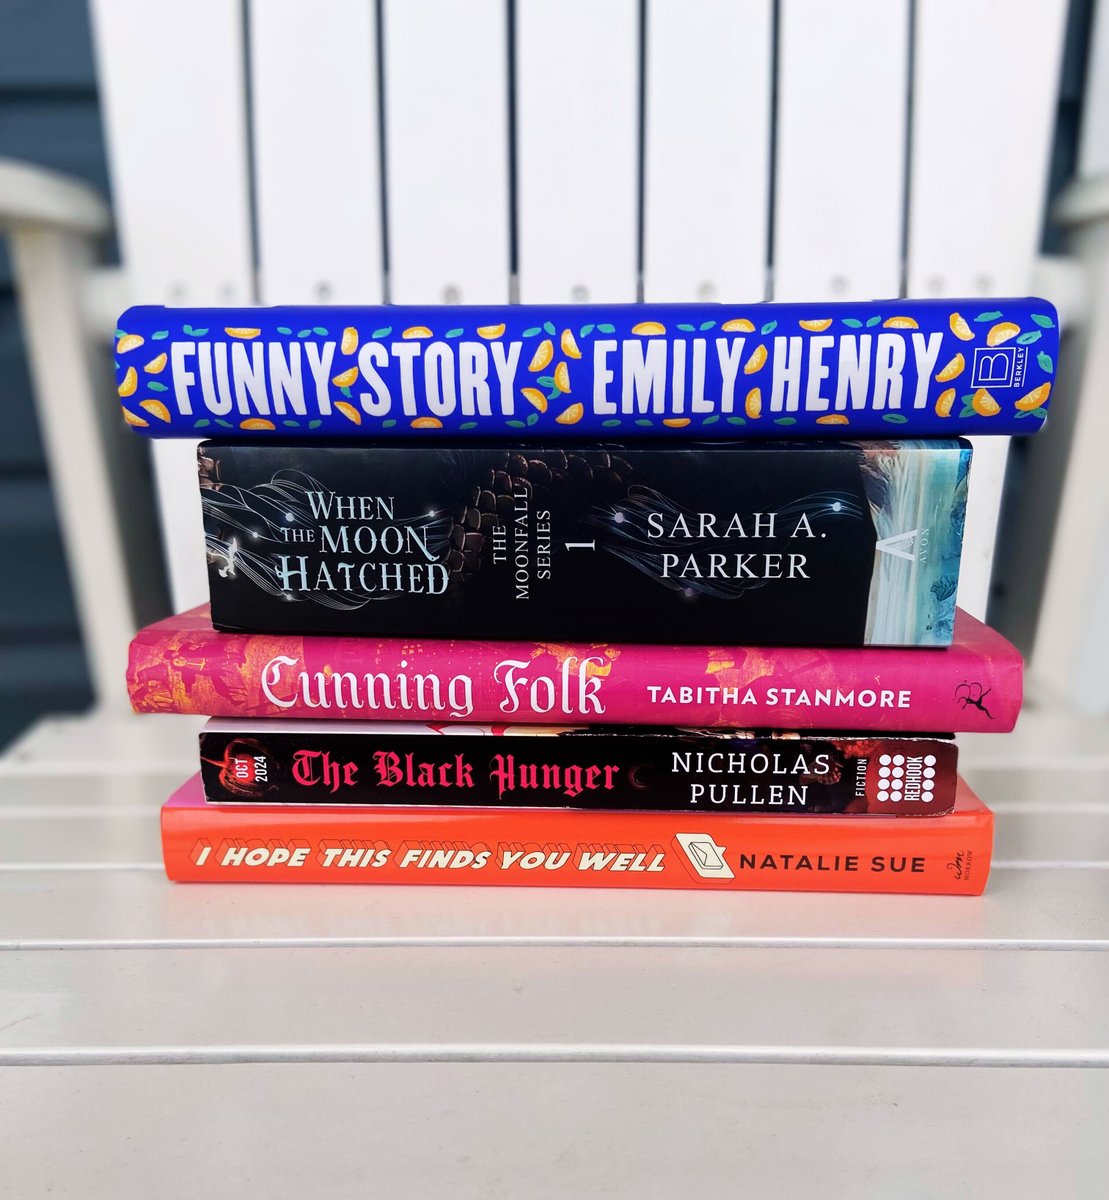 Emma's new in book mail is looking pretty dreamy! Thank you to our publisher friends for sending along these stunning books. (Funny Story was purchased from @josephbeth ✨Thank you for the signed option!) Let us know if you want more info on any of these books! 👀